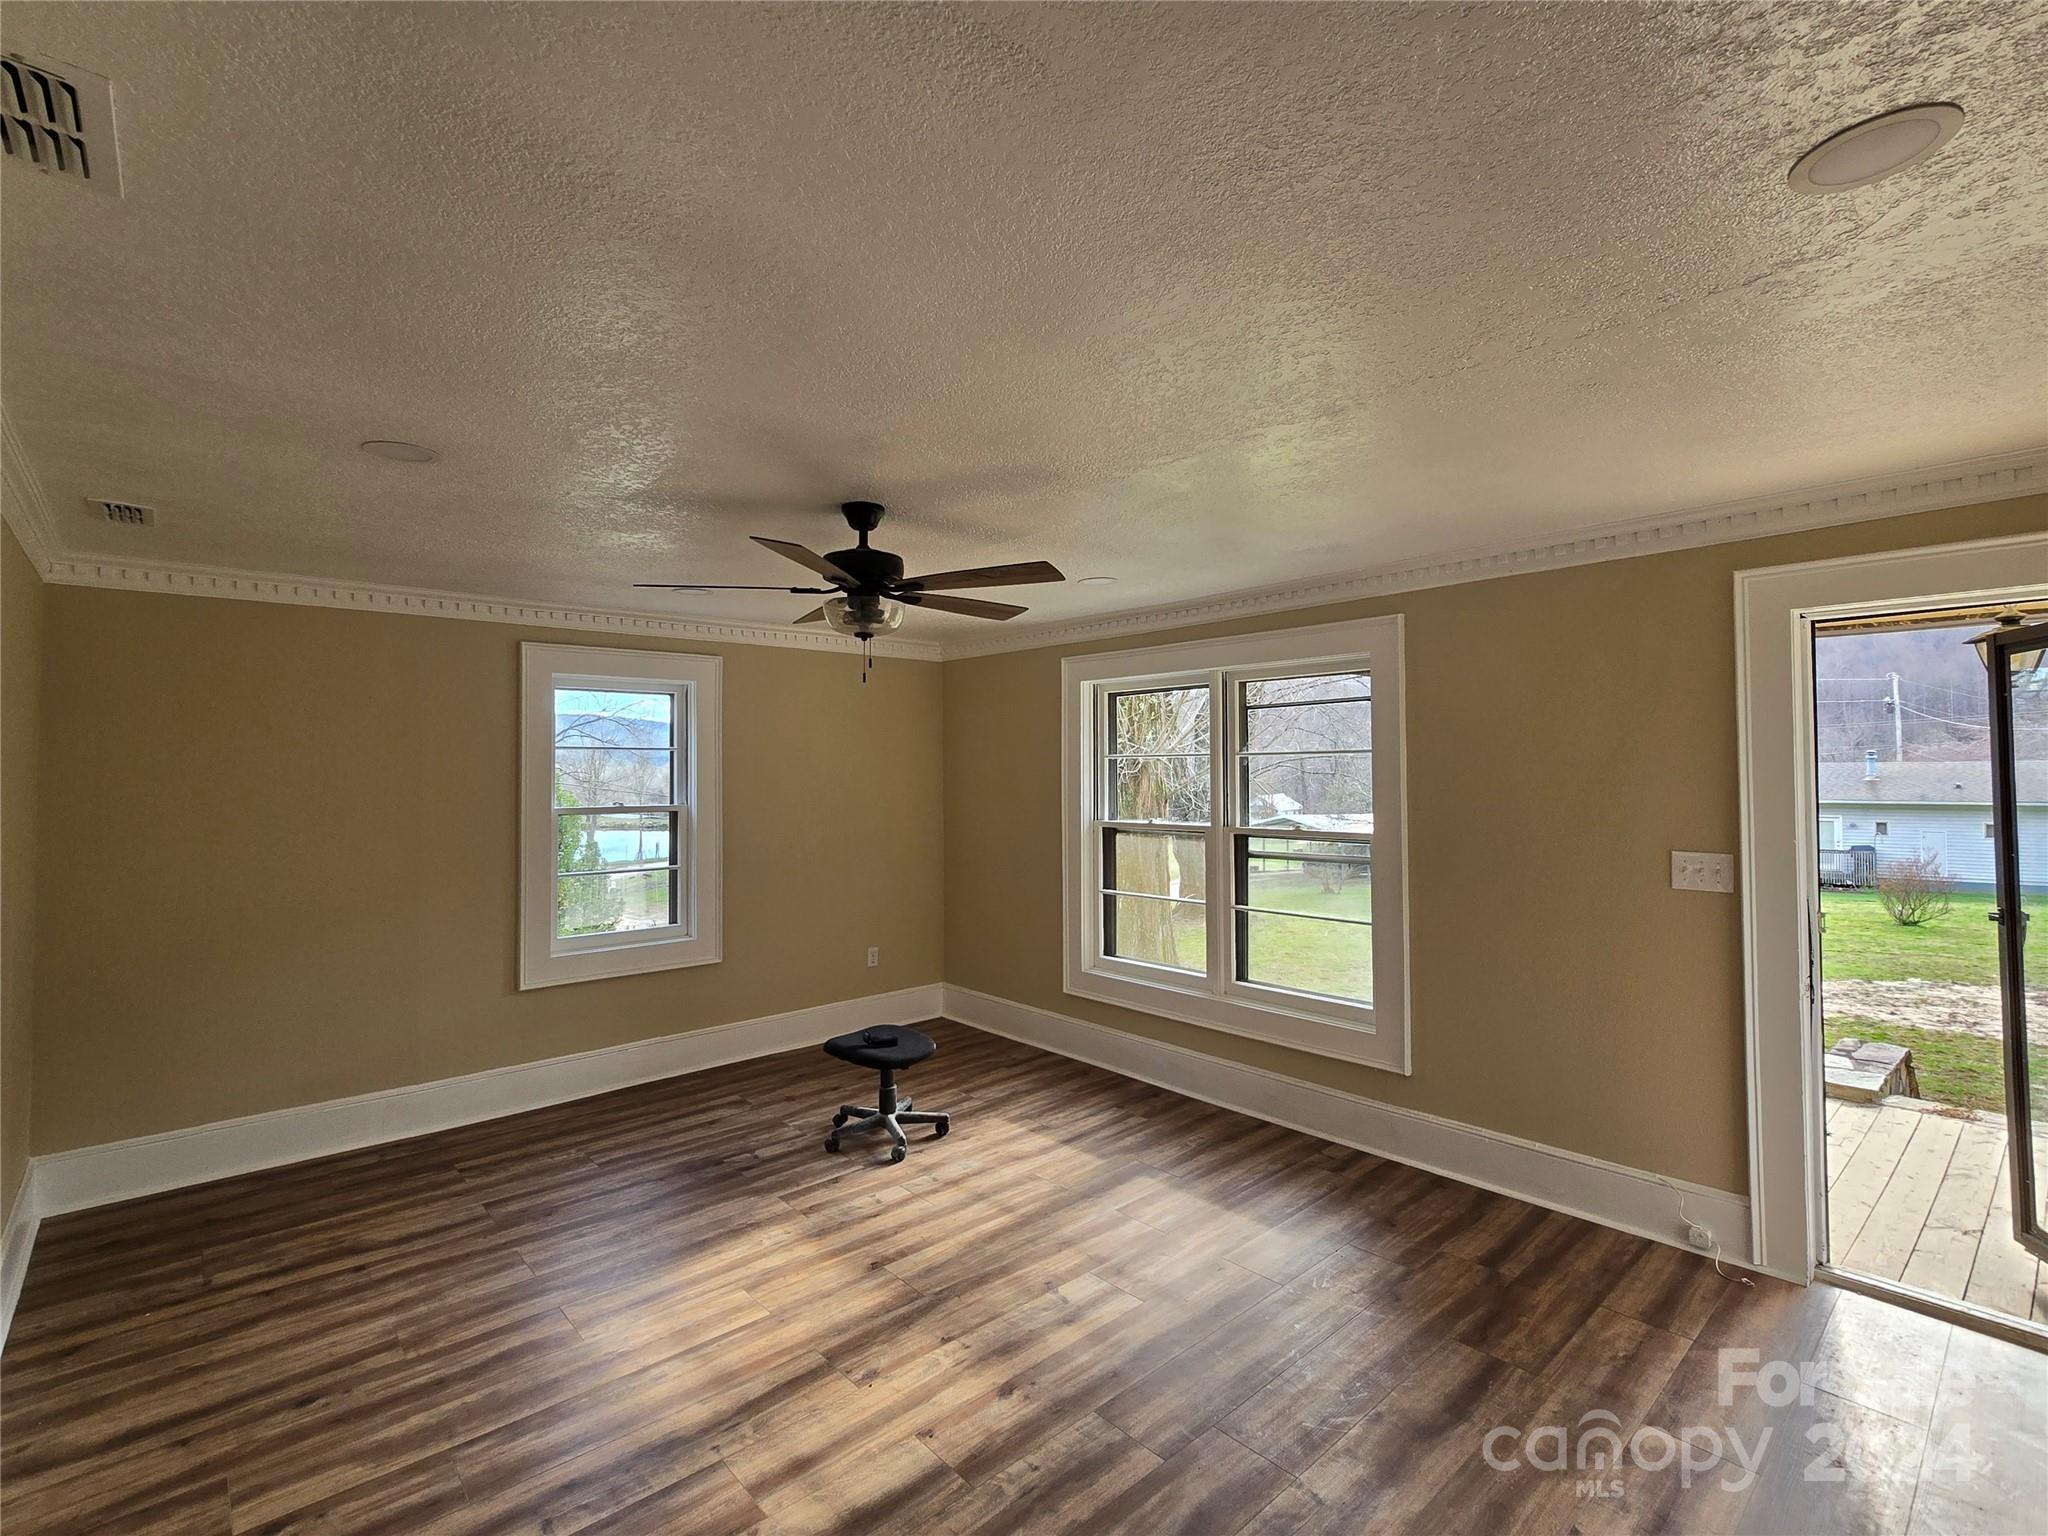 Property Image for 76 Sneed Drive